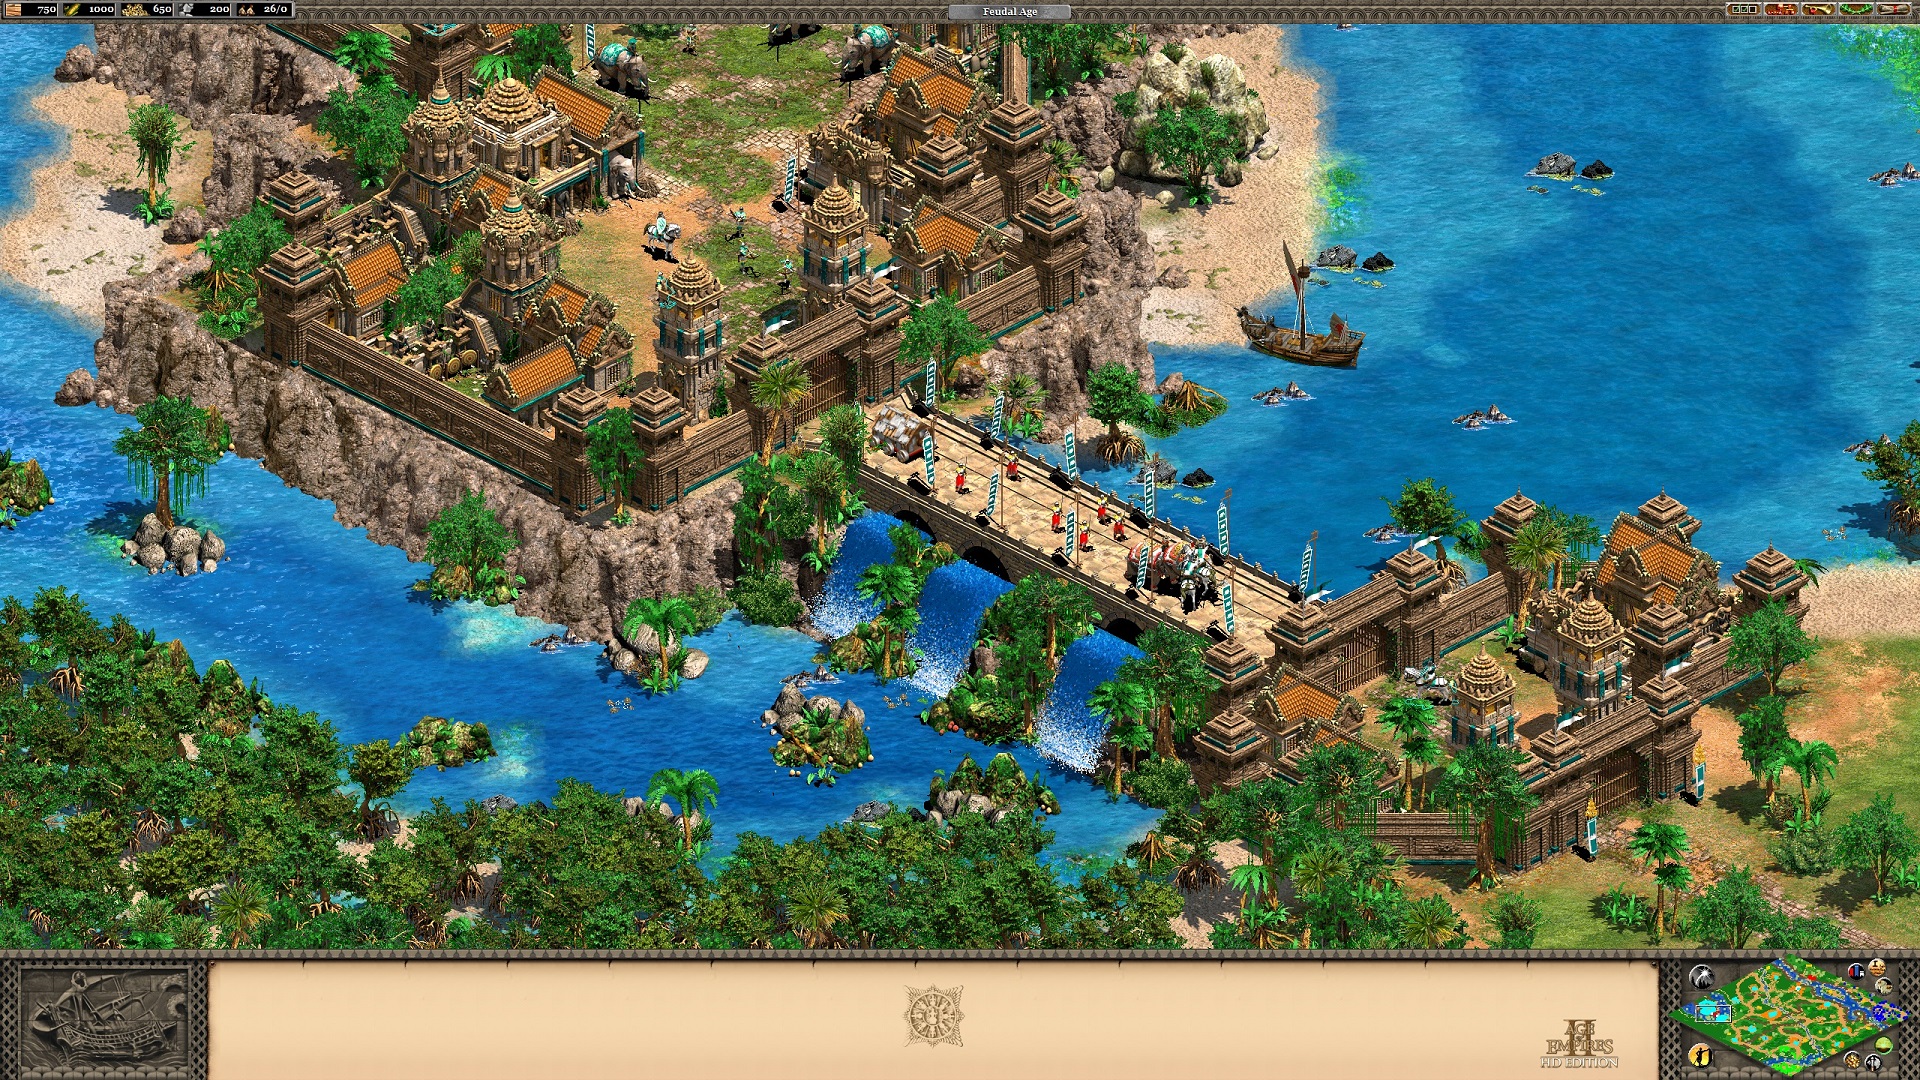 Age of Empires II (2013): Rise of the Rajas Featured Screenshot #1